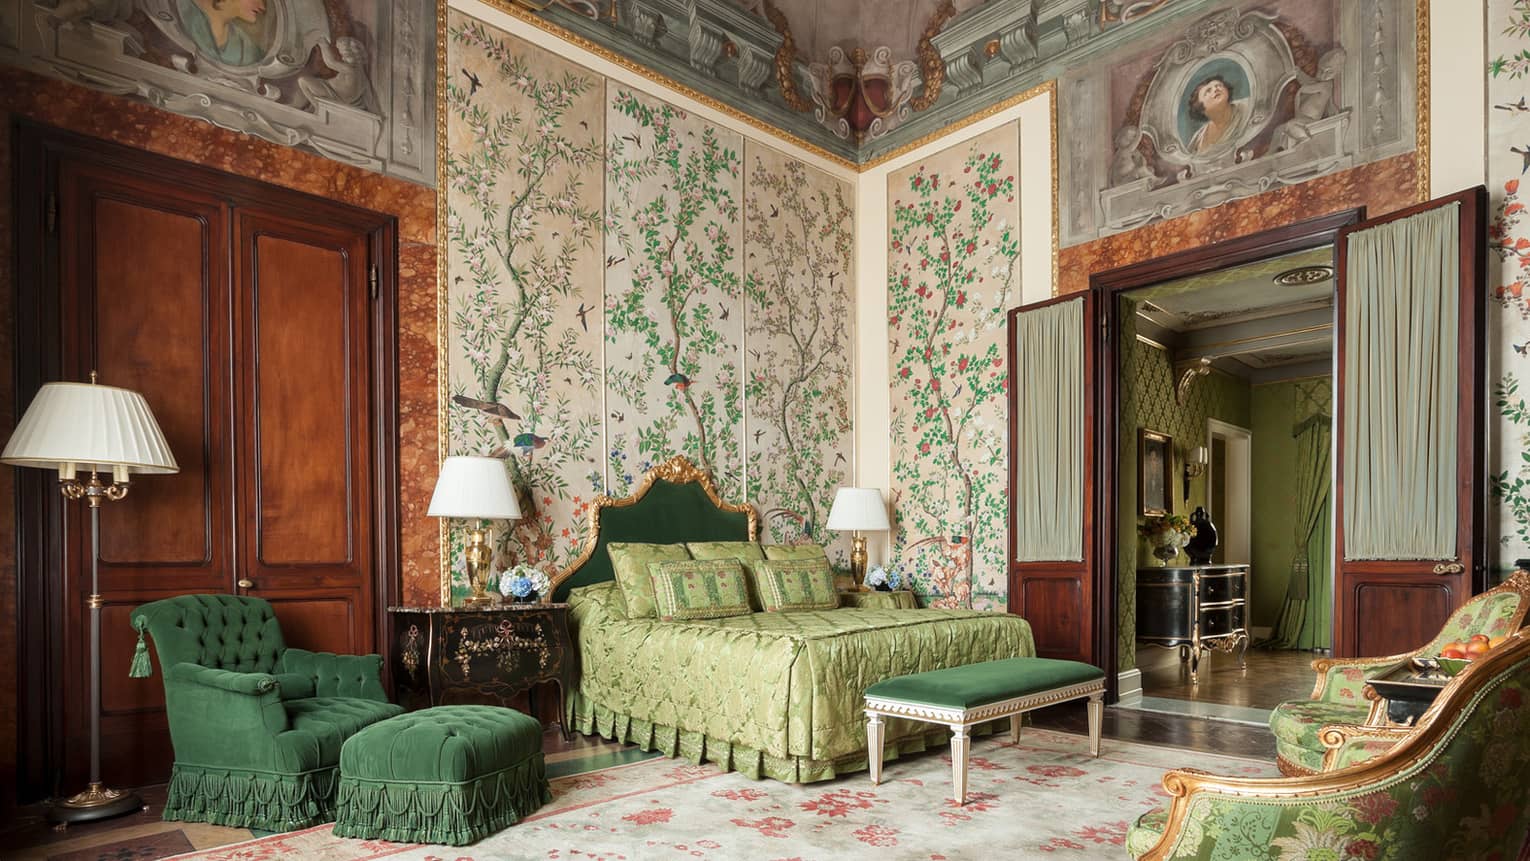 Hotel room with bed, green velvet chair and bench, antique garden wallpaper